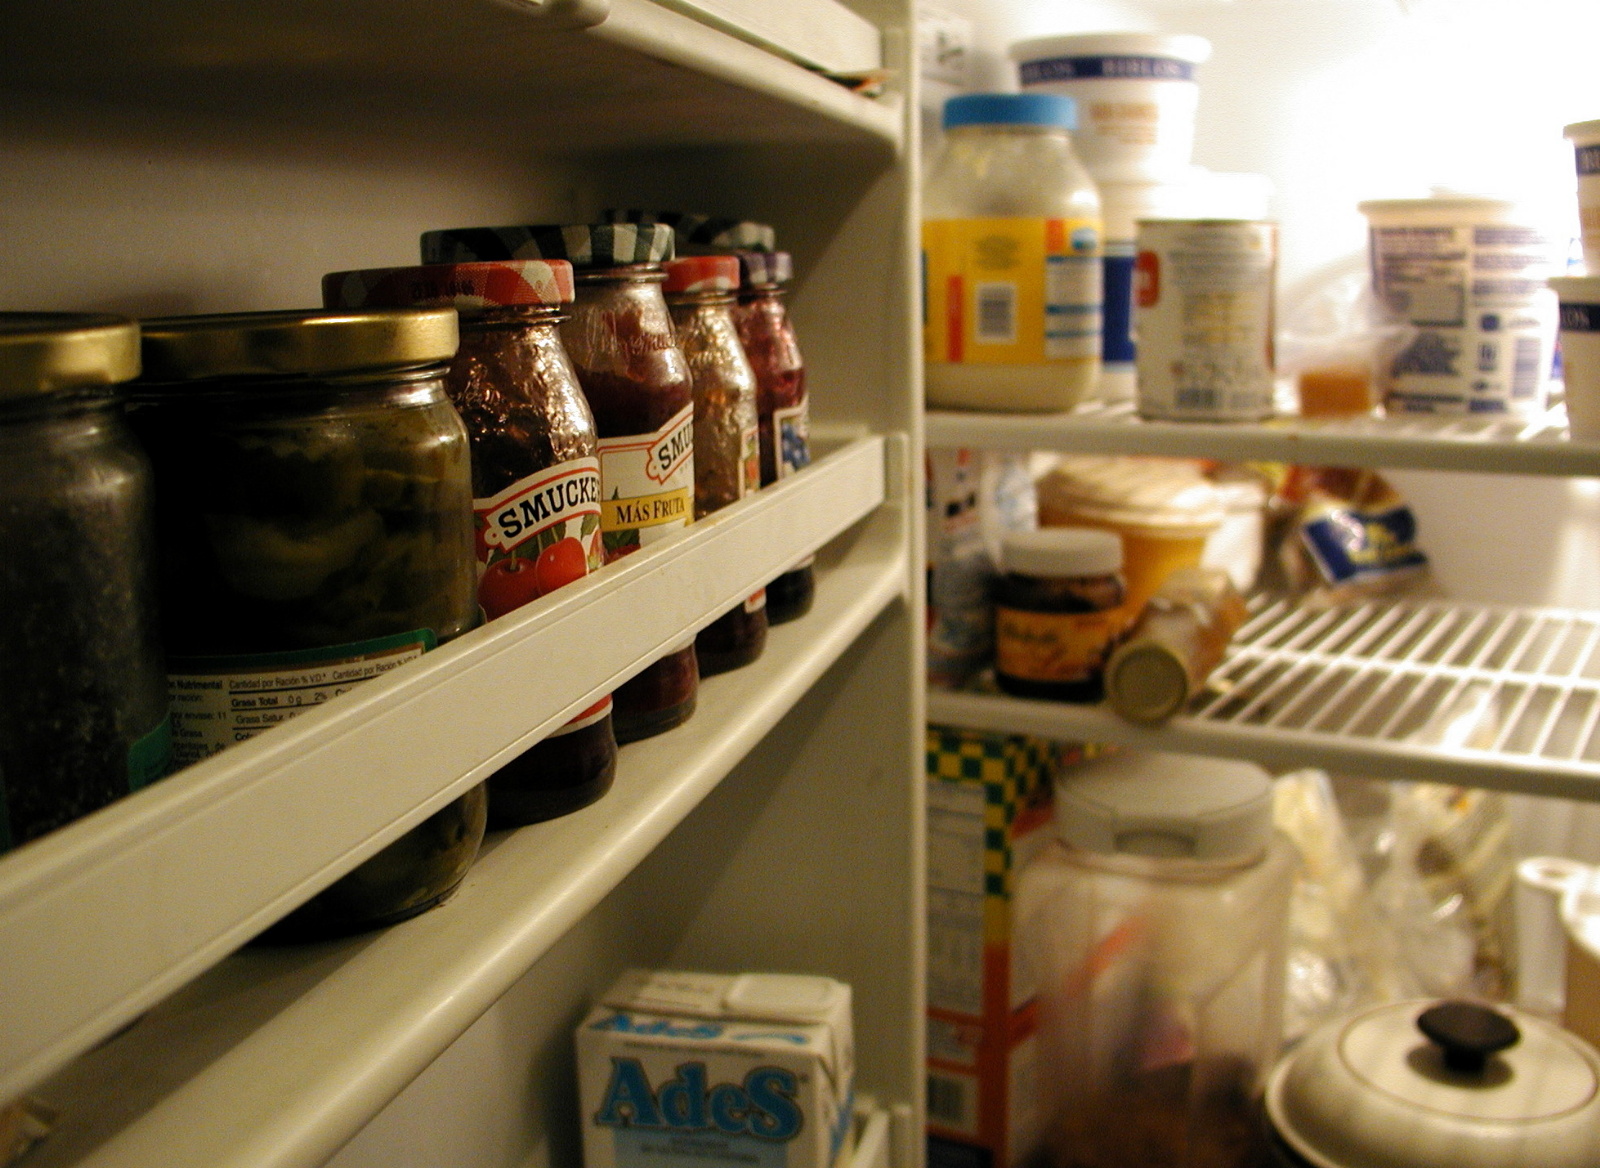 Are Powerlifters as Unhealthy as Everyone Thinks? A Peek at Our Sponsors' Refrigerators